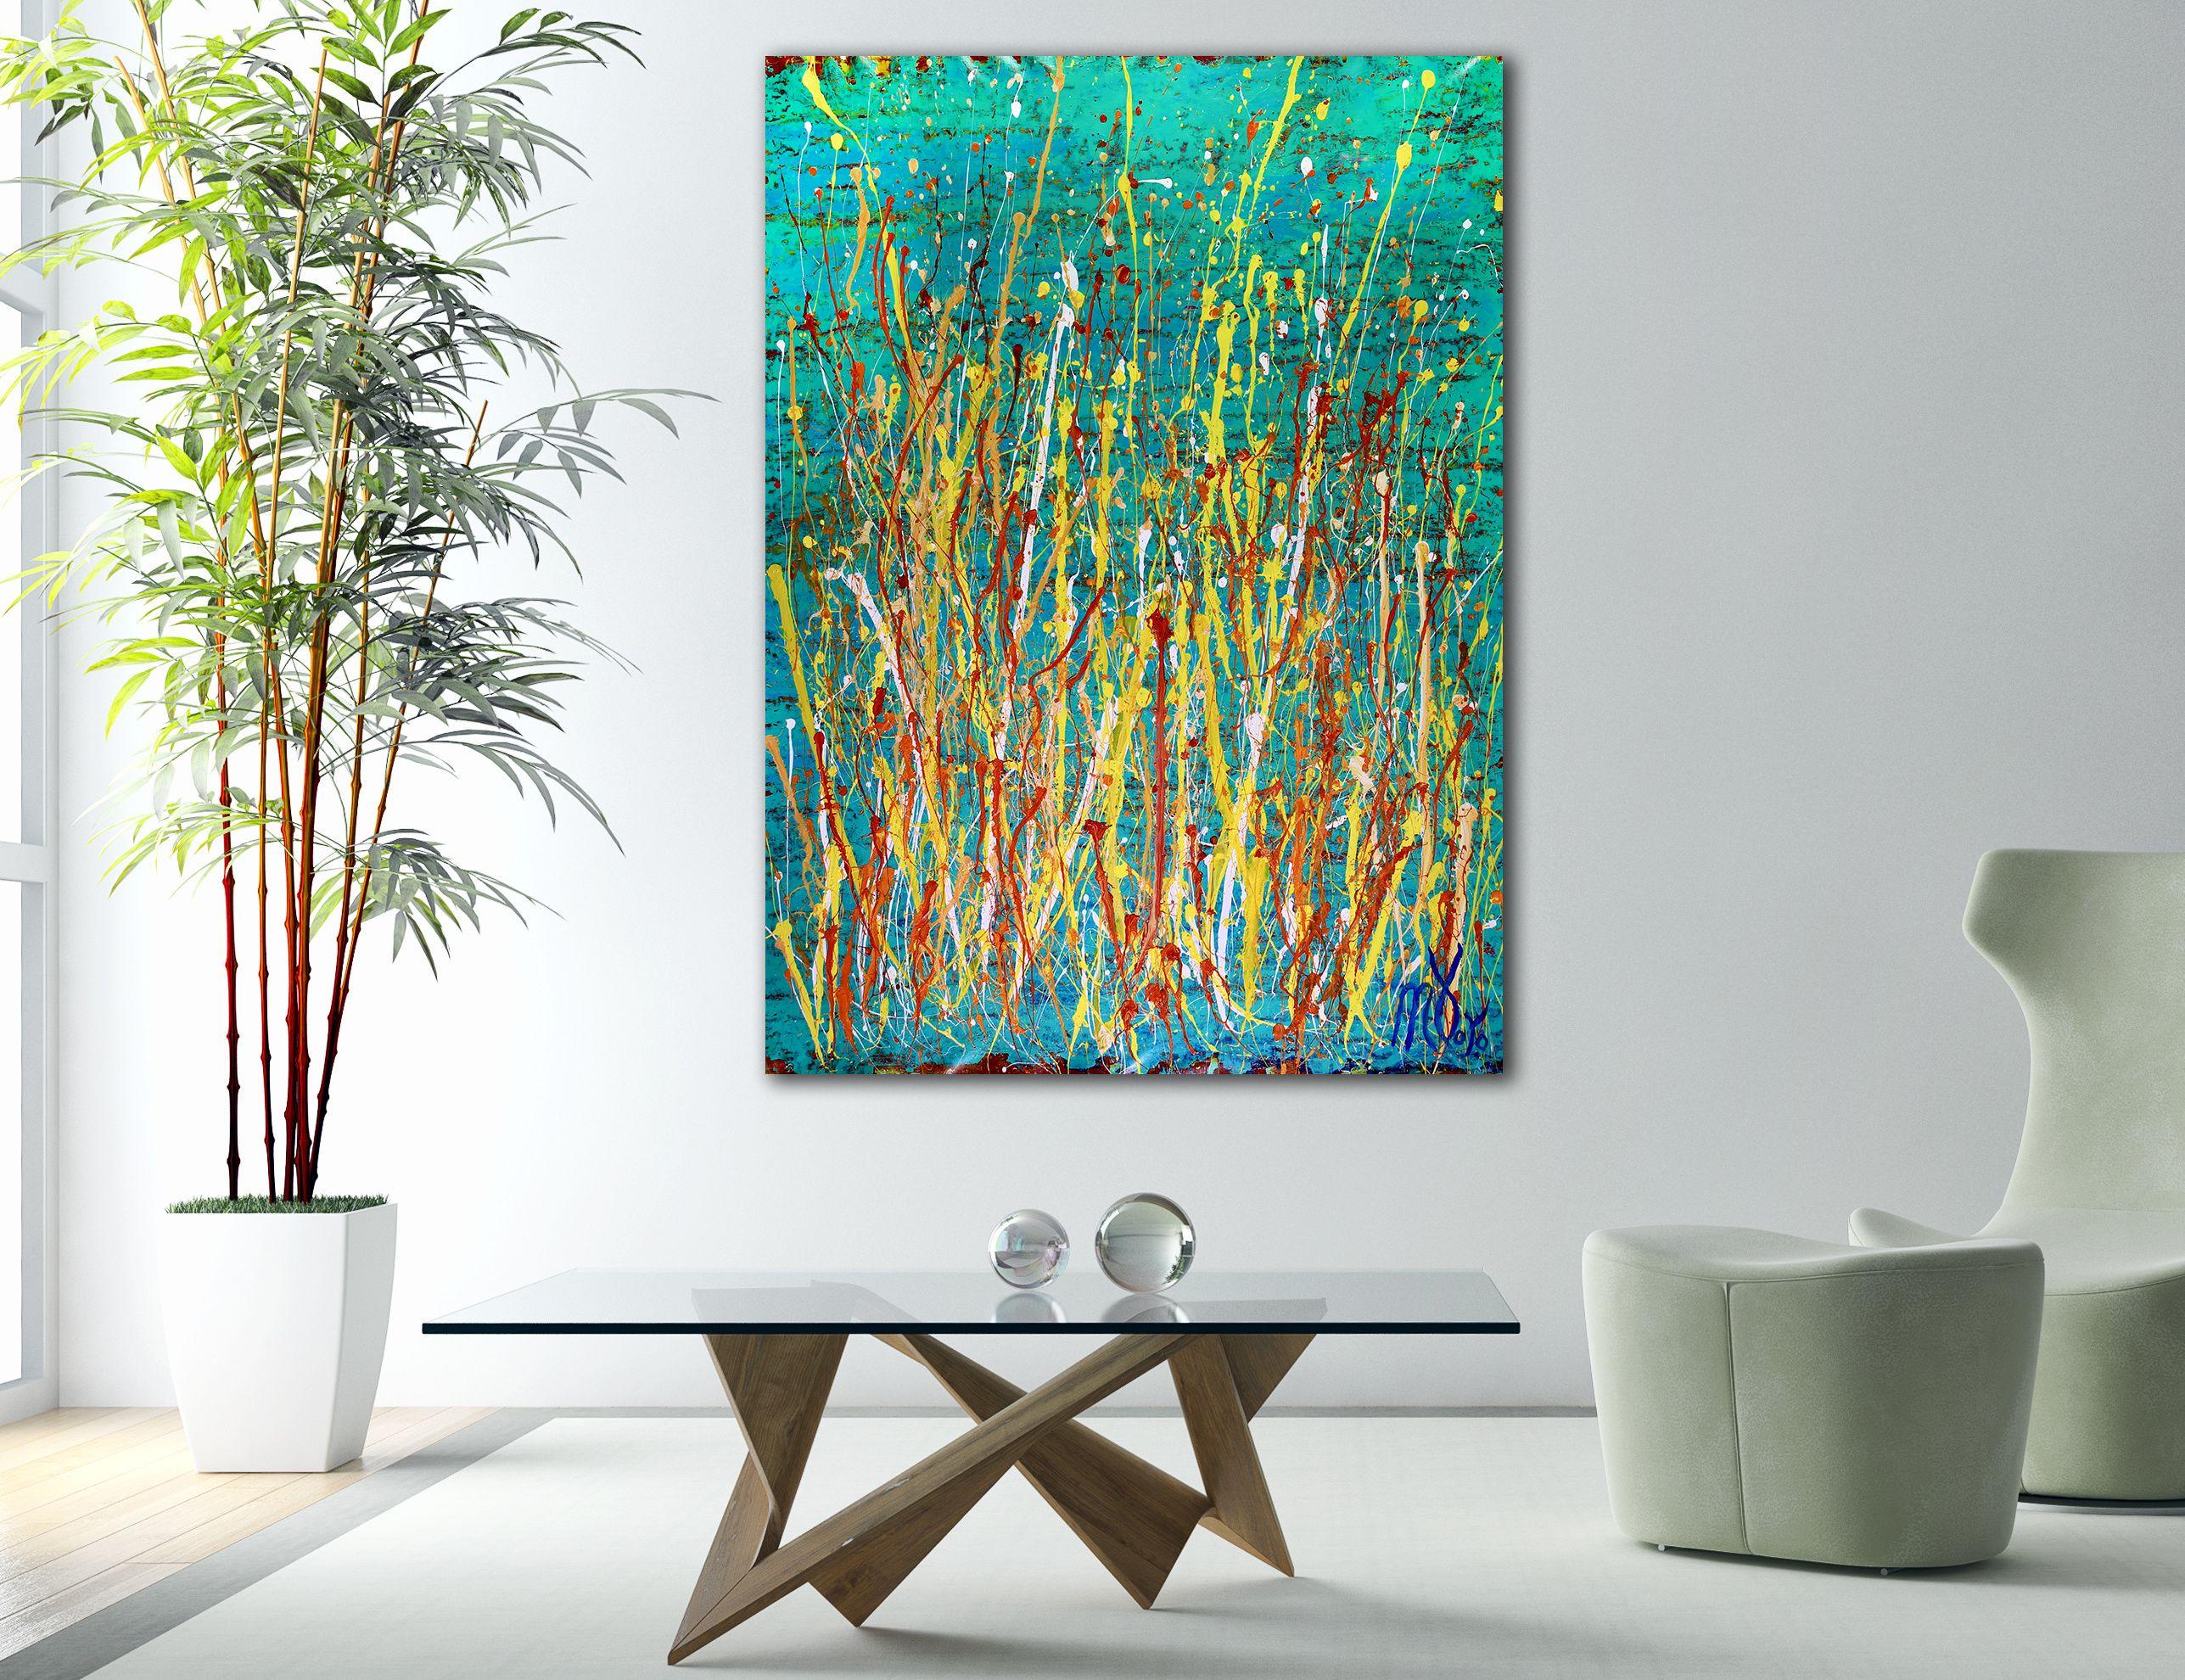 NATURE INSPIRED ABSTRACT - LOTS OF PAINT DRIZZLES!     This abstract painting is very layered with aqua green background and, yellow, orange and white paint strokes. Beautiful active gestural statement piece. Signed.    I only make original works.